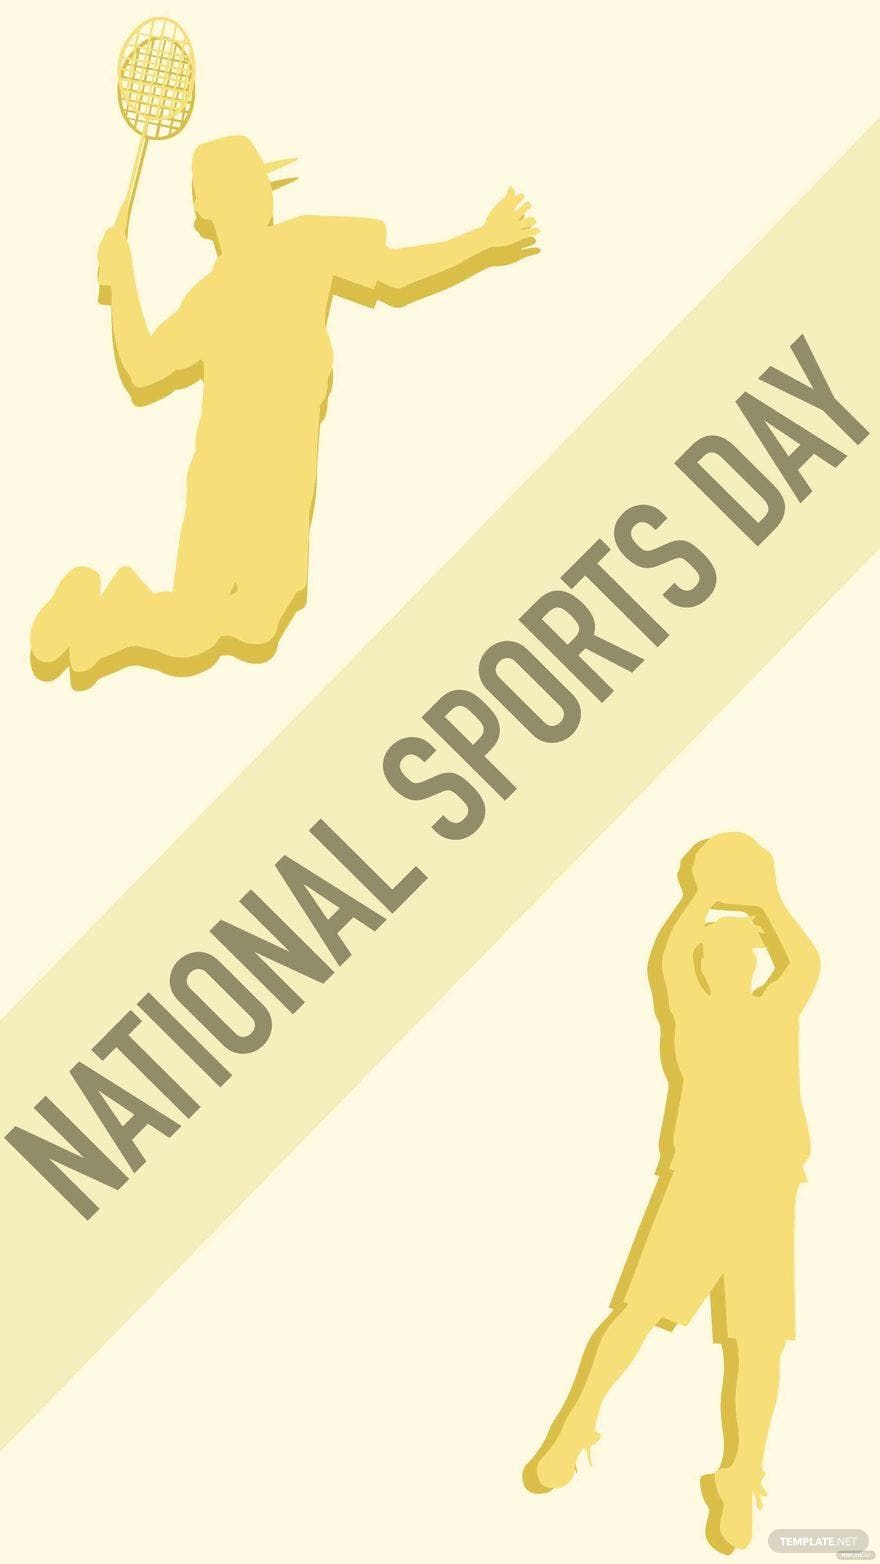 Free National Sports Day iPhone Background in PDF, Illustrator, PSD, EPS, SVG, JPG, PNG